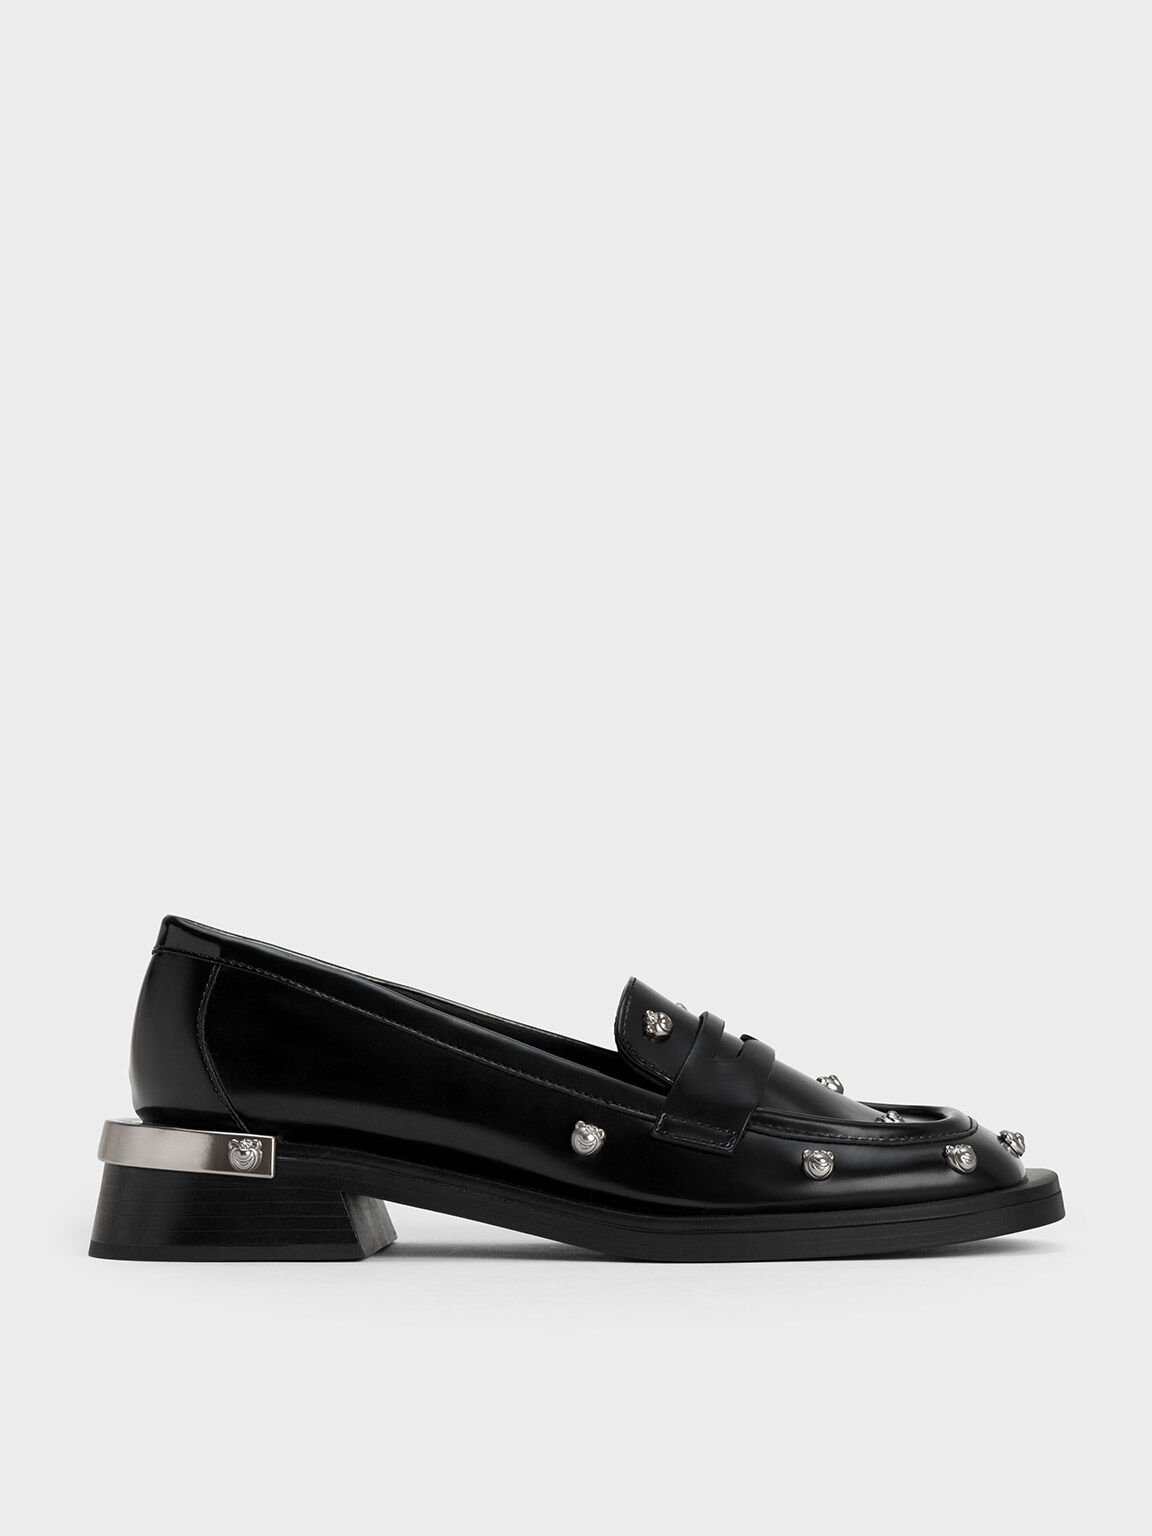 Lotso Studded Penny Loafers, Black, hi-res